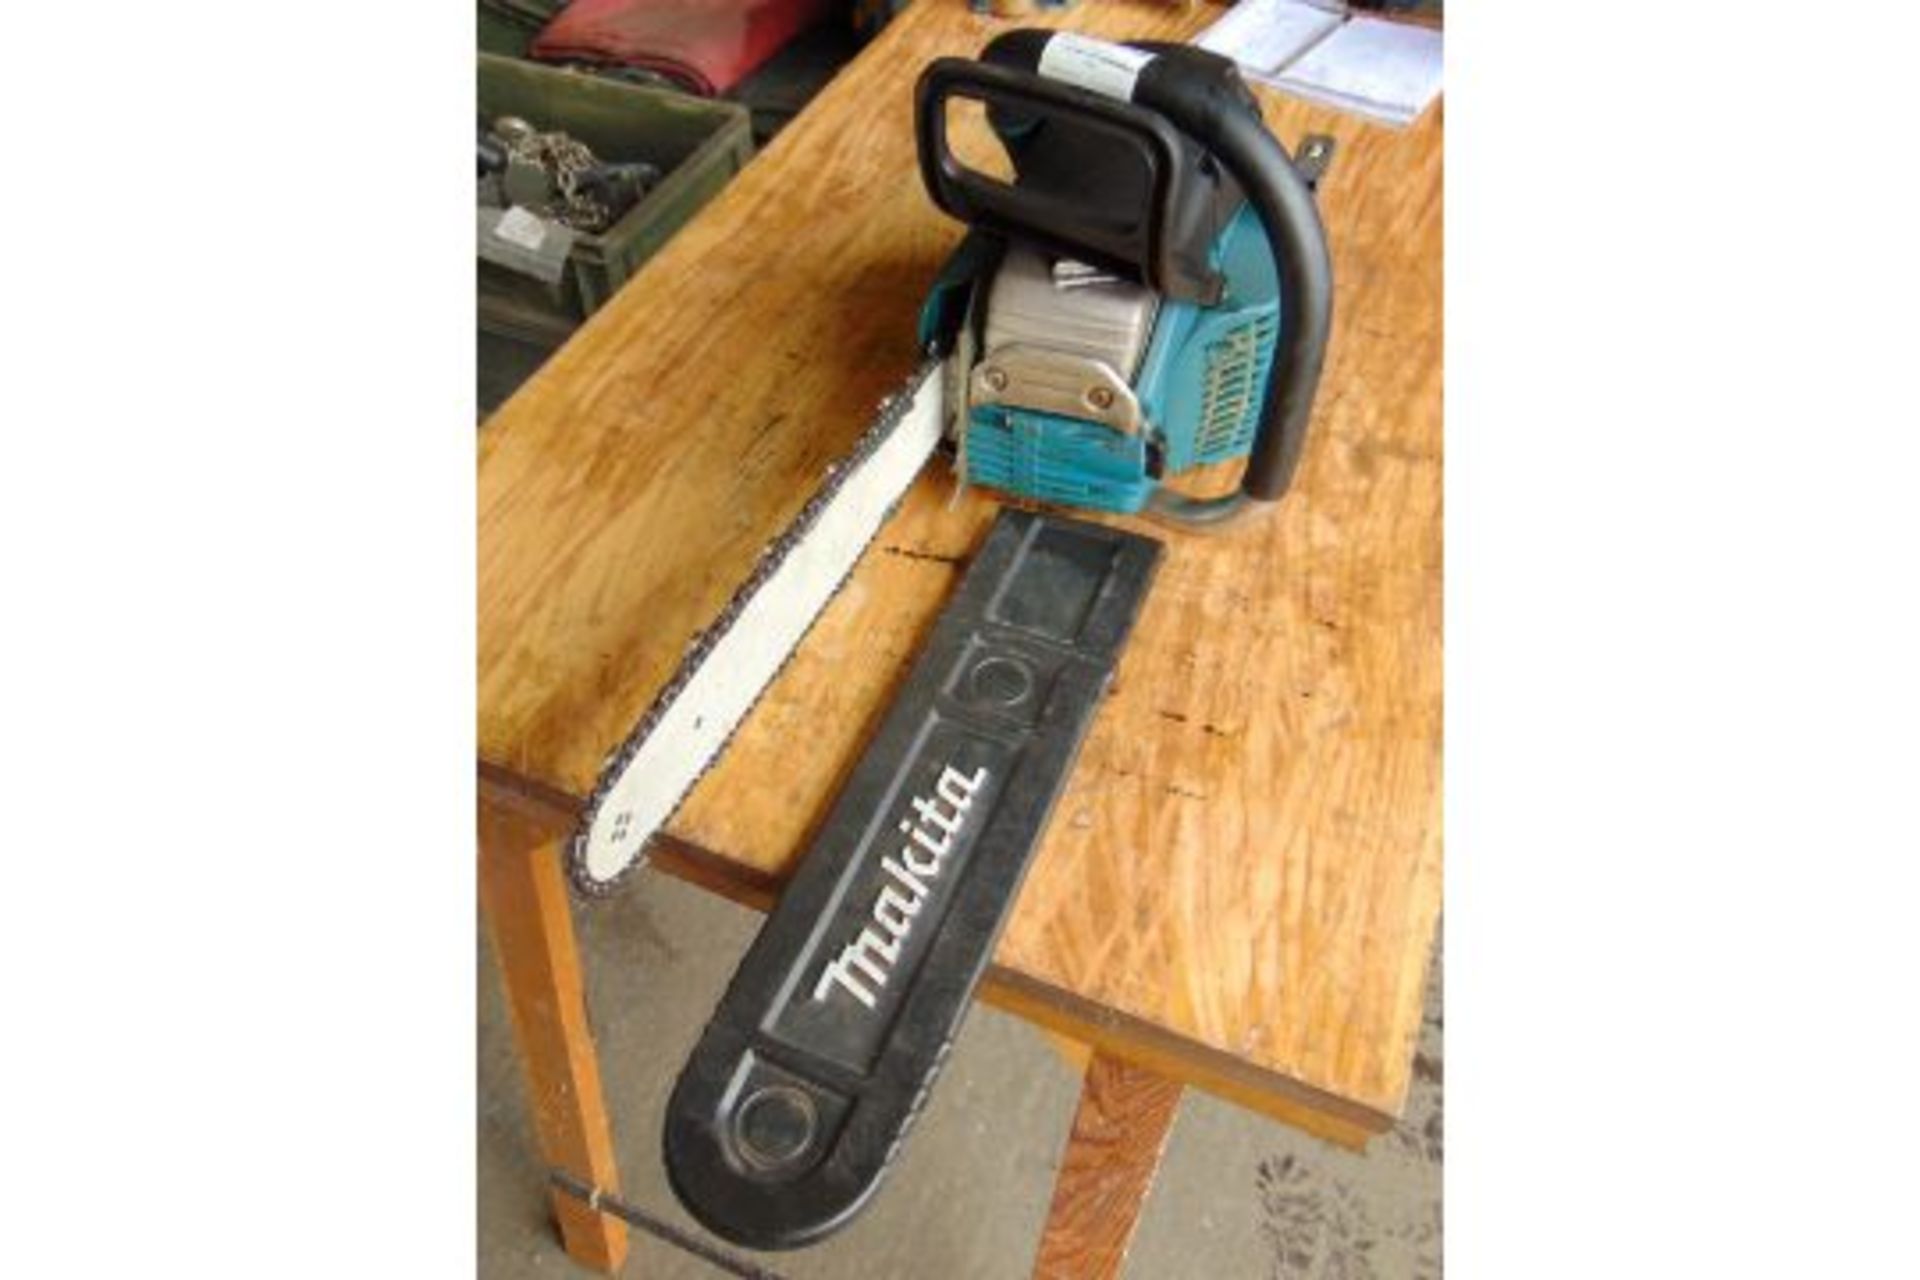 MAKITA DCS 5030 50CC Chainsaw c/w Chain Guard from MoD. - Image 3 of 4